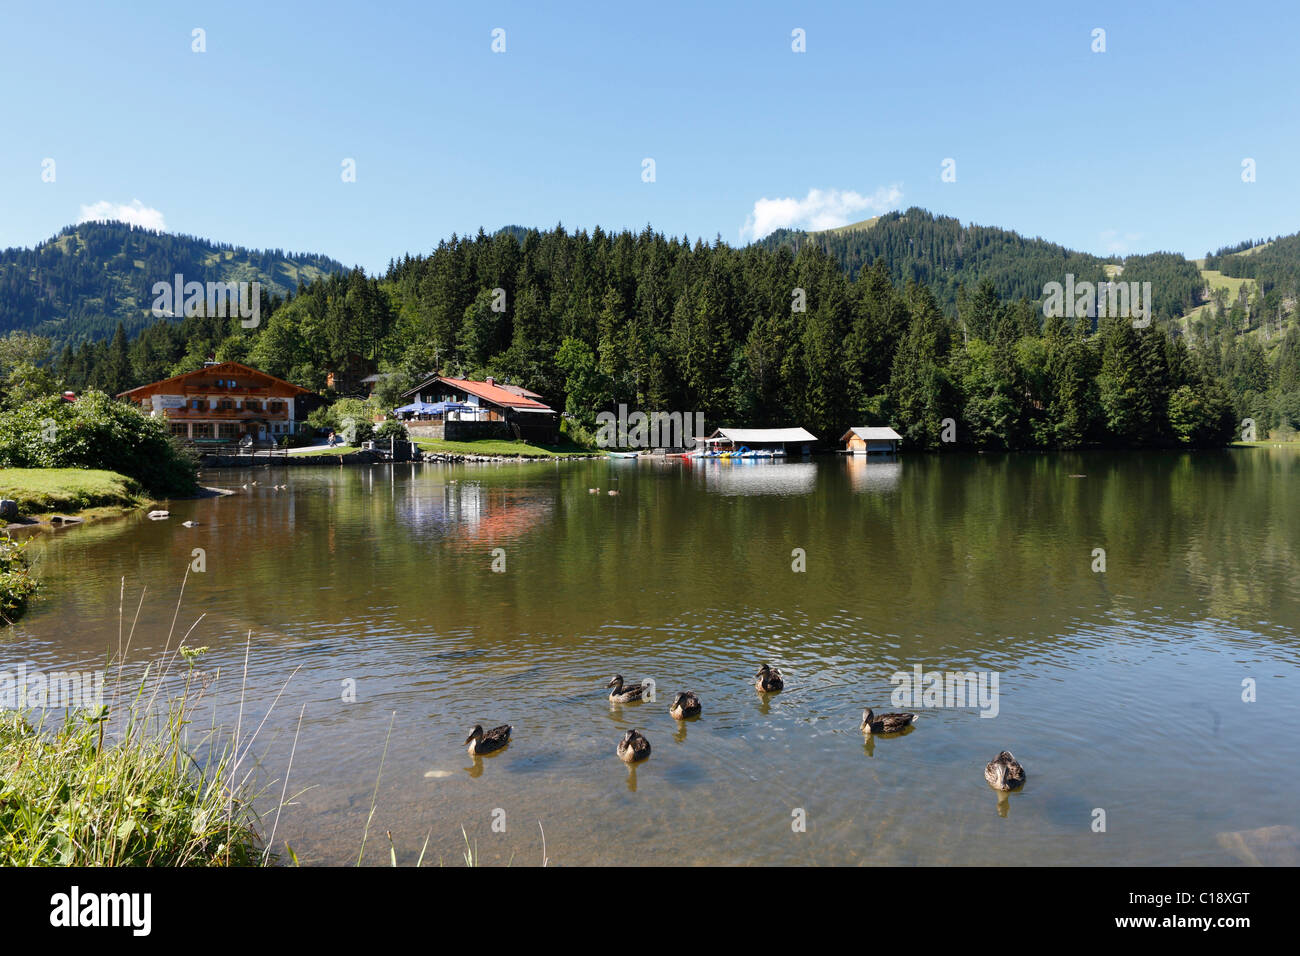 Village and Lake Spitzingsee, Mangfall Mountains, Alps, Upper Bavaria, Germany, Europe Stock Photo